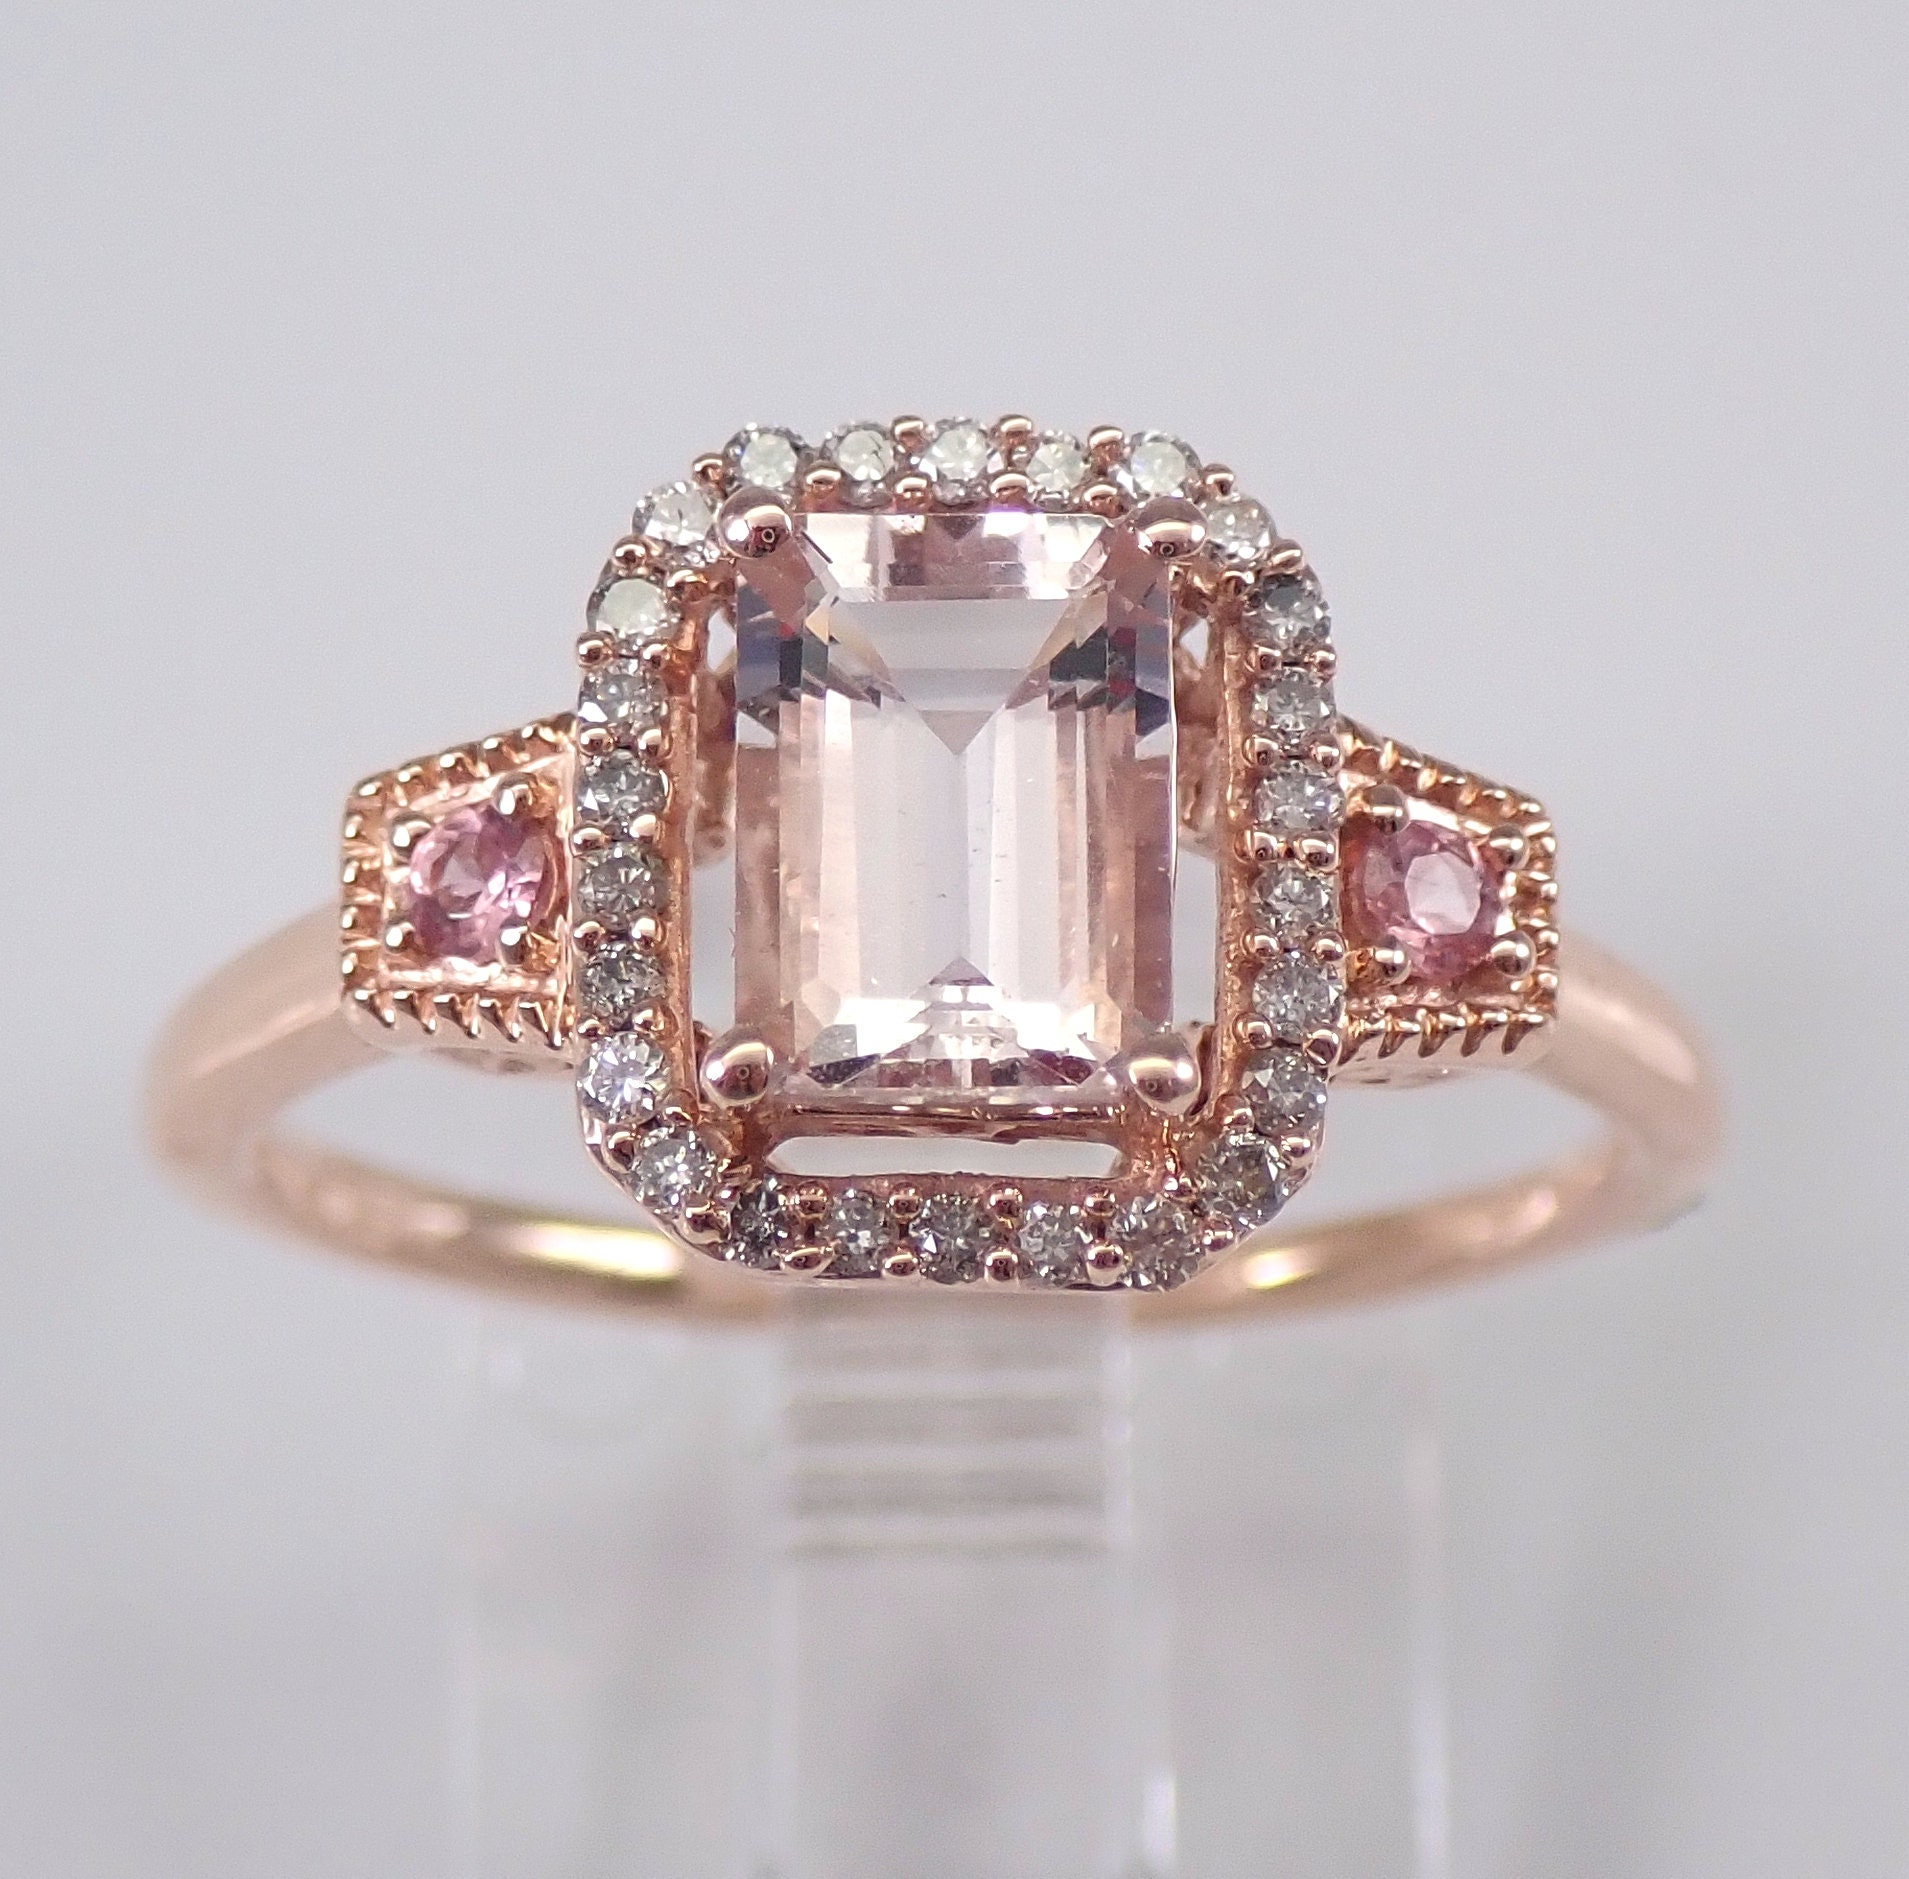 Shop Pink Tourmaline Ring in 14k Real Gold Online| Chordia Jewels